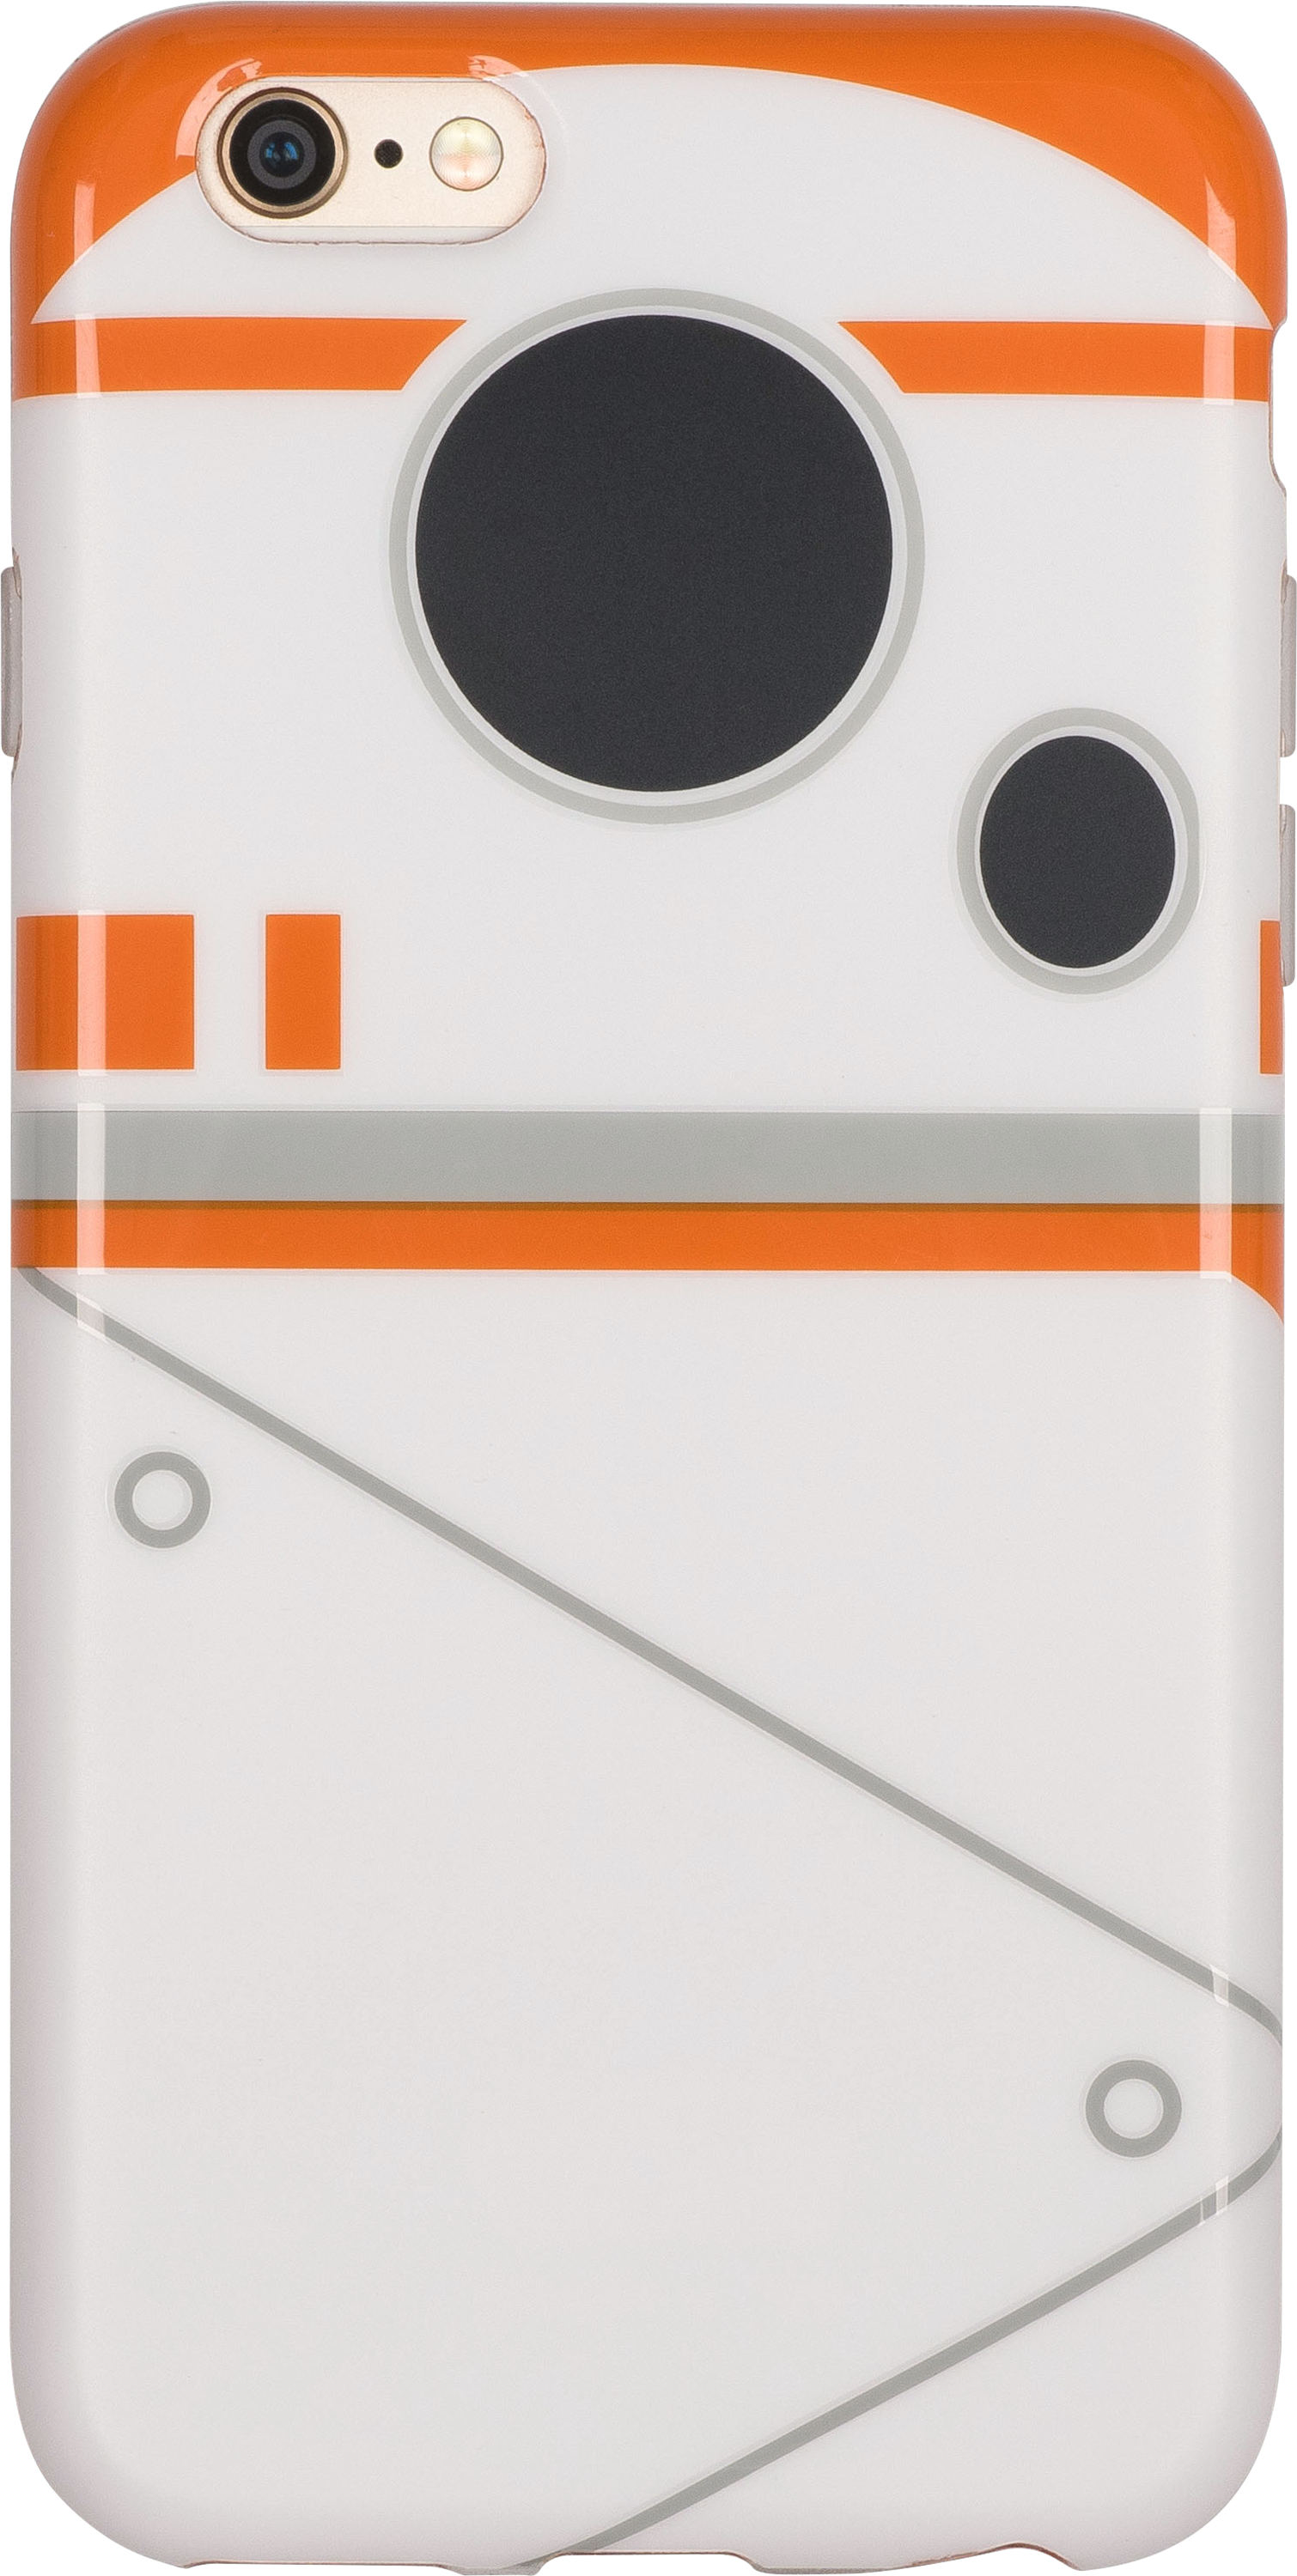 Tribe Star Wars - Hood Cover for iPhone 5/5S/SE BB-8